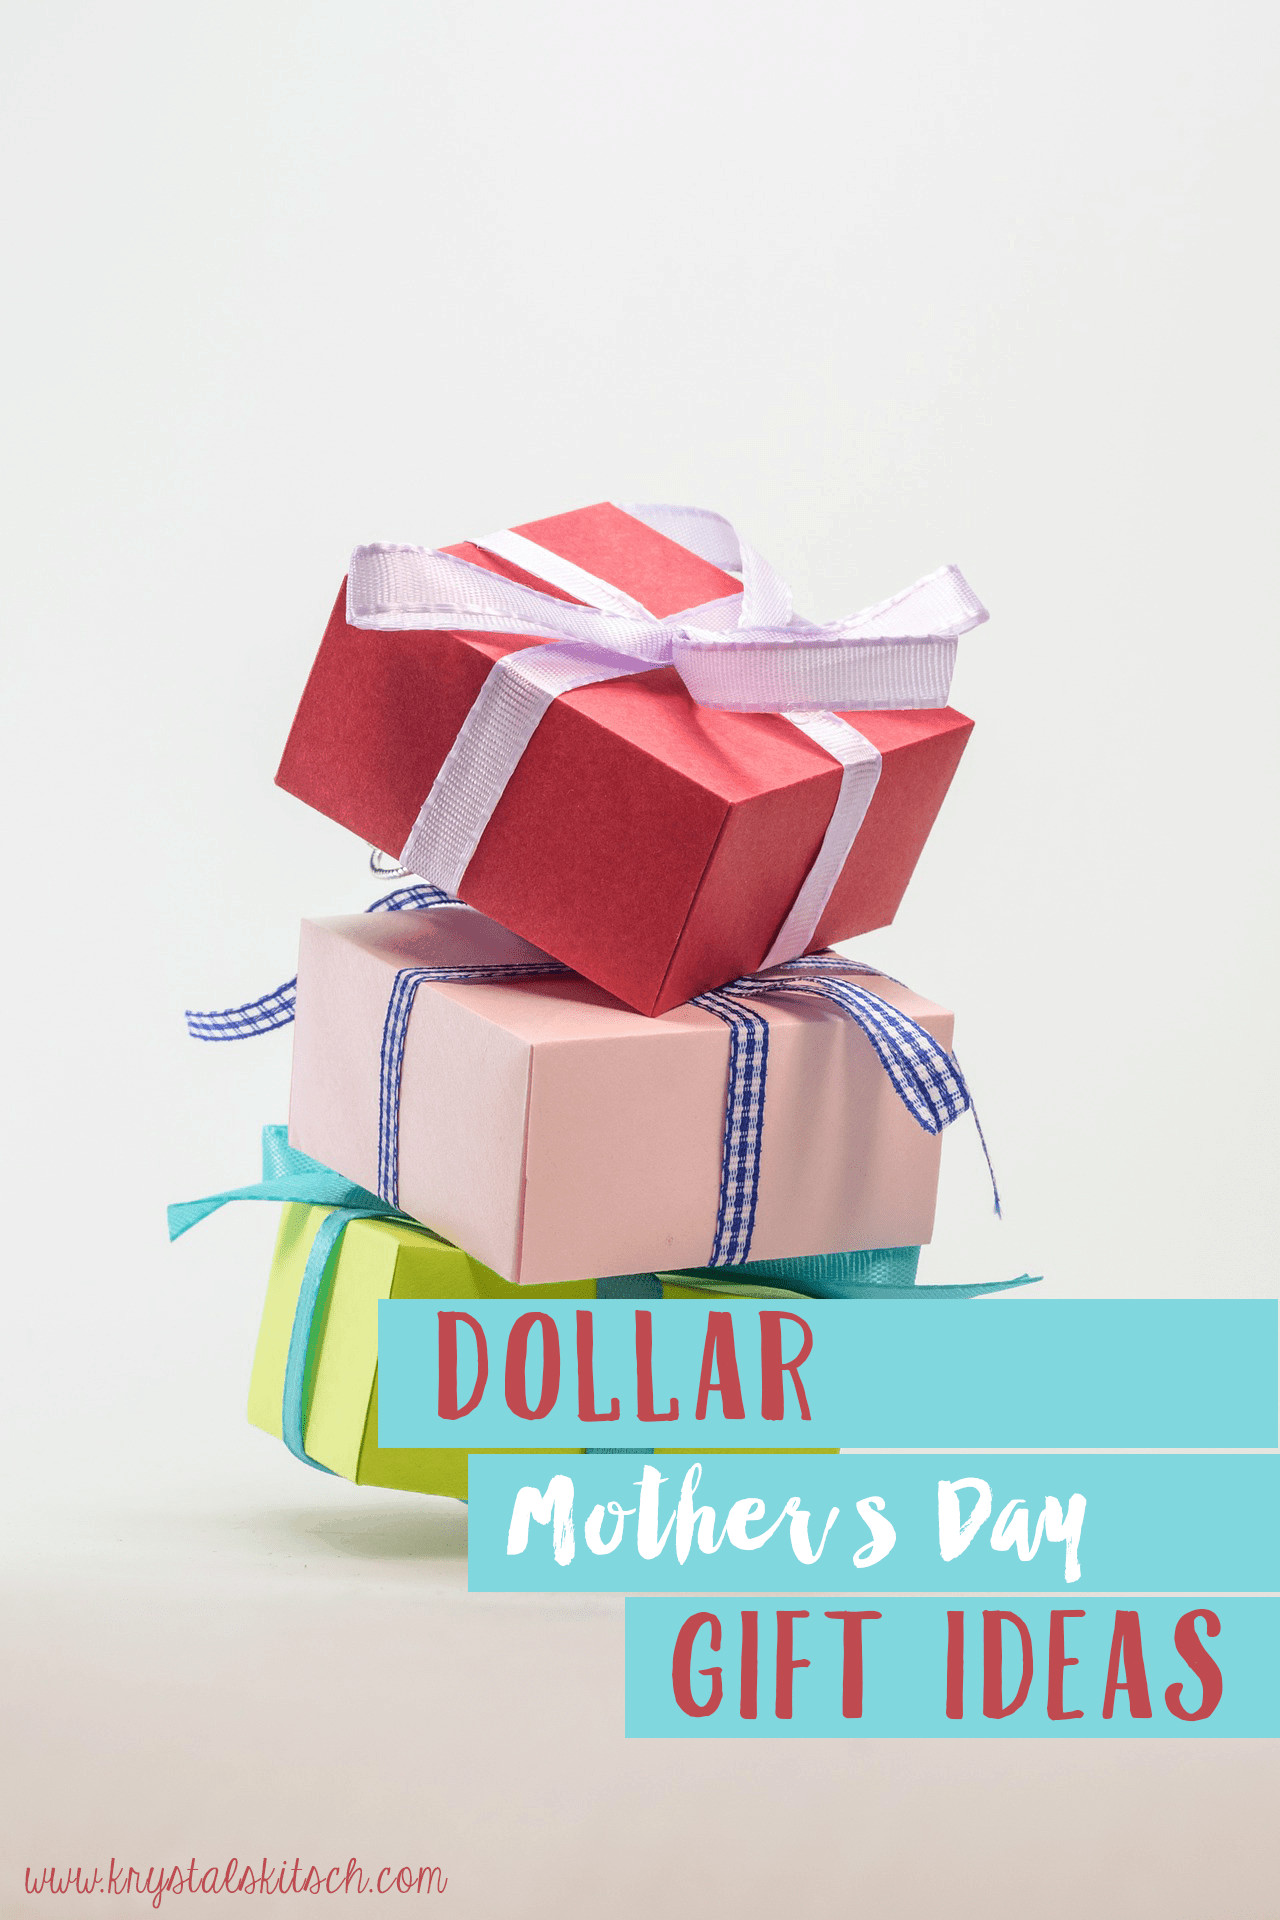 Mothers Day Gift Ideas Pinterest
 Mother s Day Gift Ideas For $1 Sunny Sweet Days